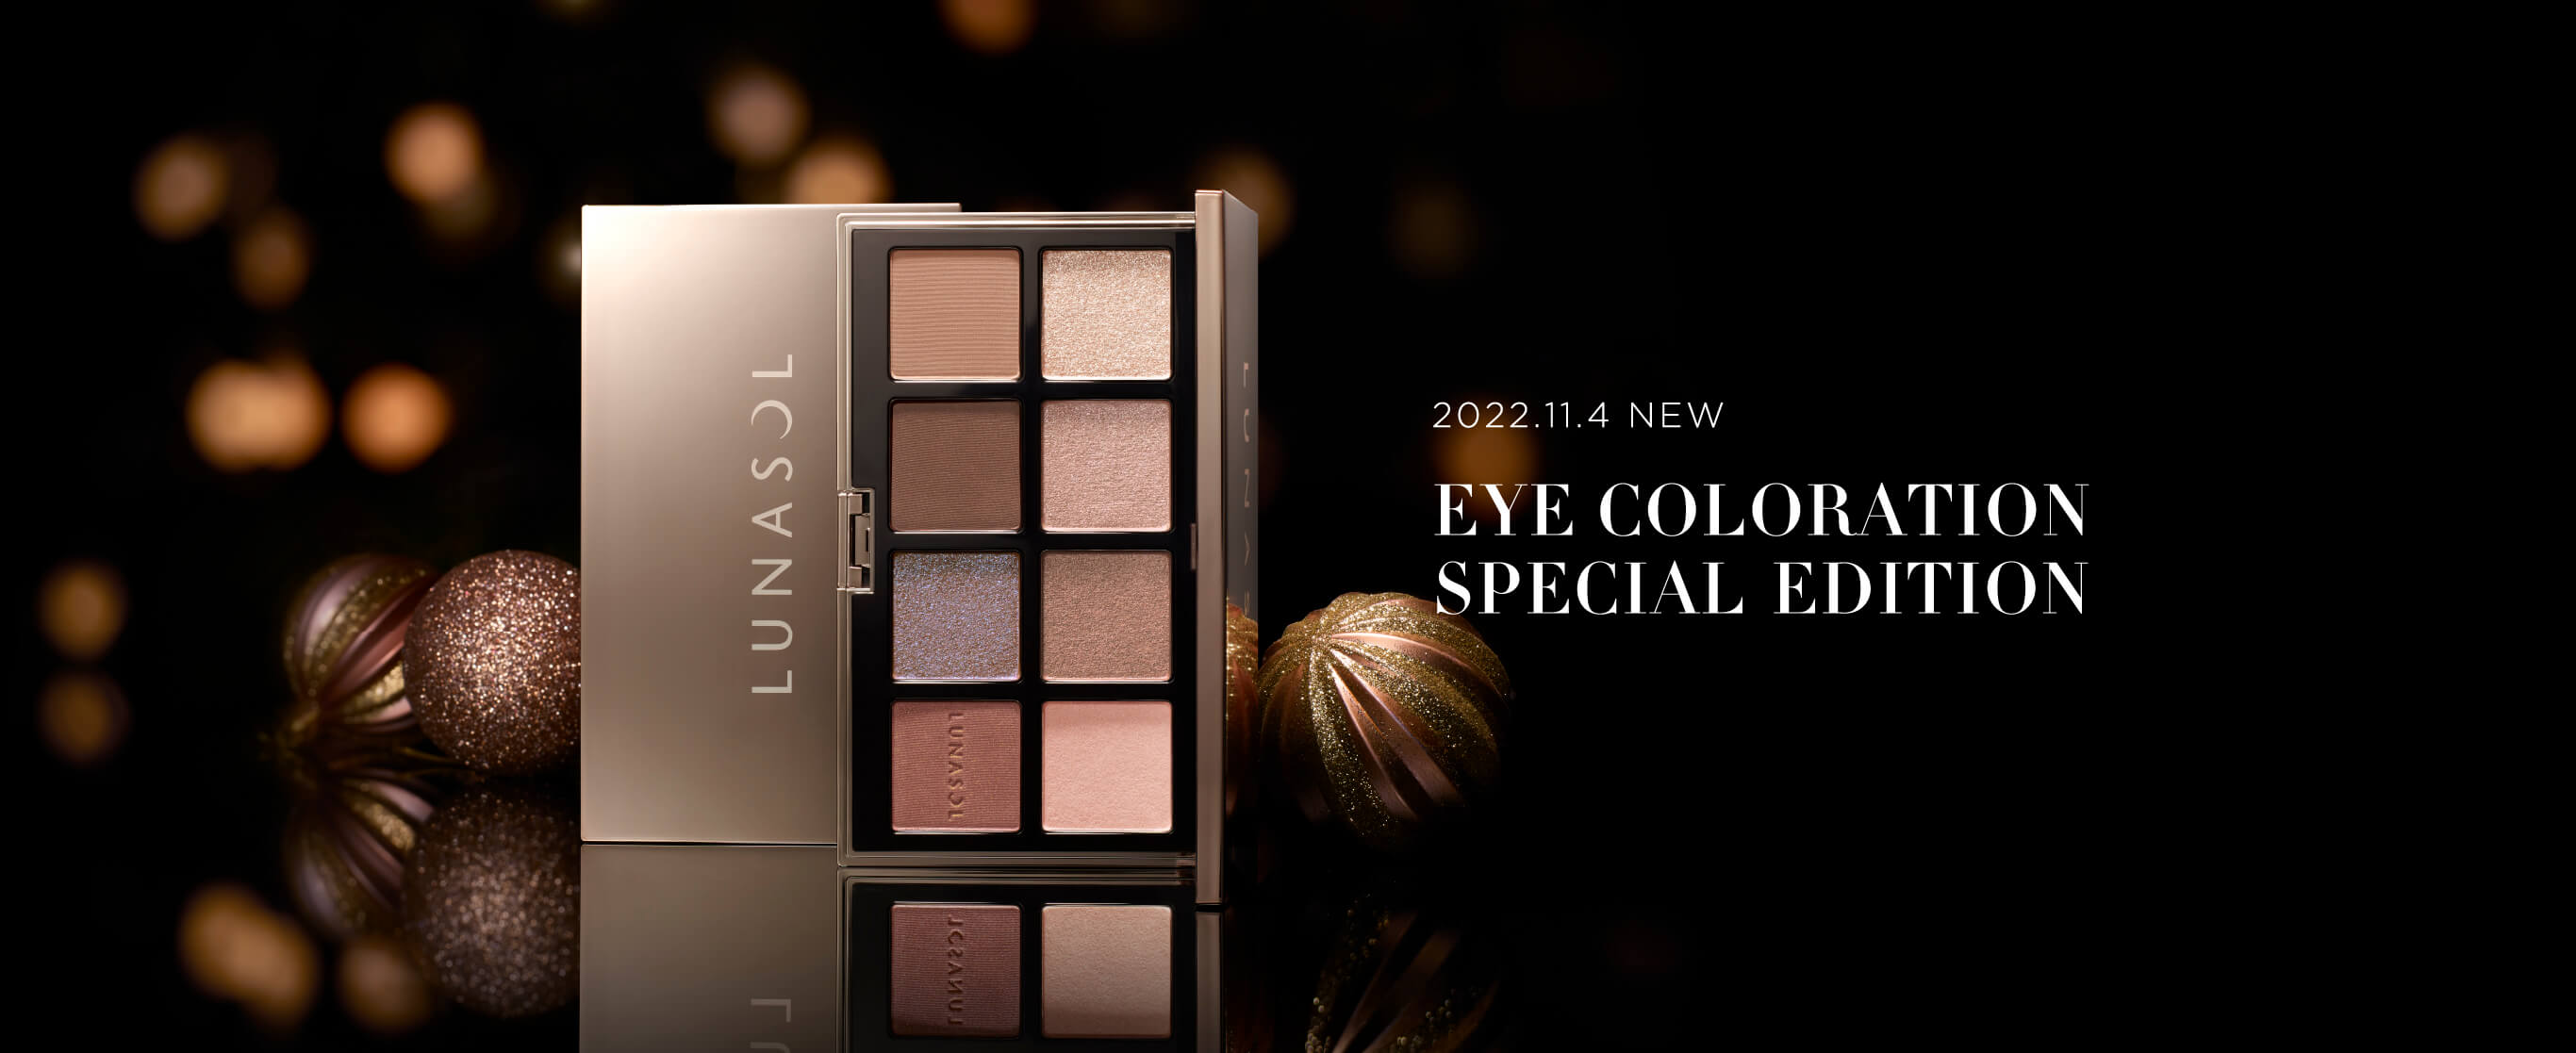 2022.11.4 NEW EYE COLORATION SPECIAL EDITION